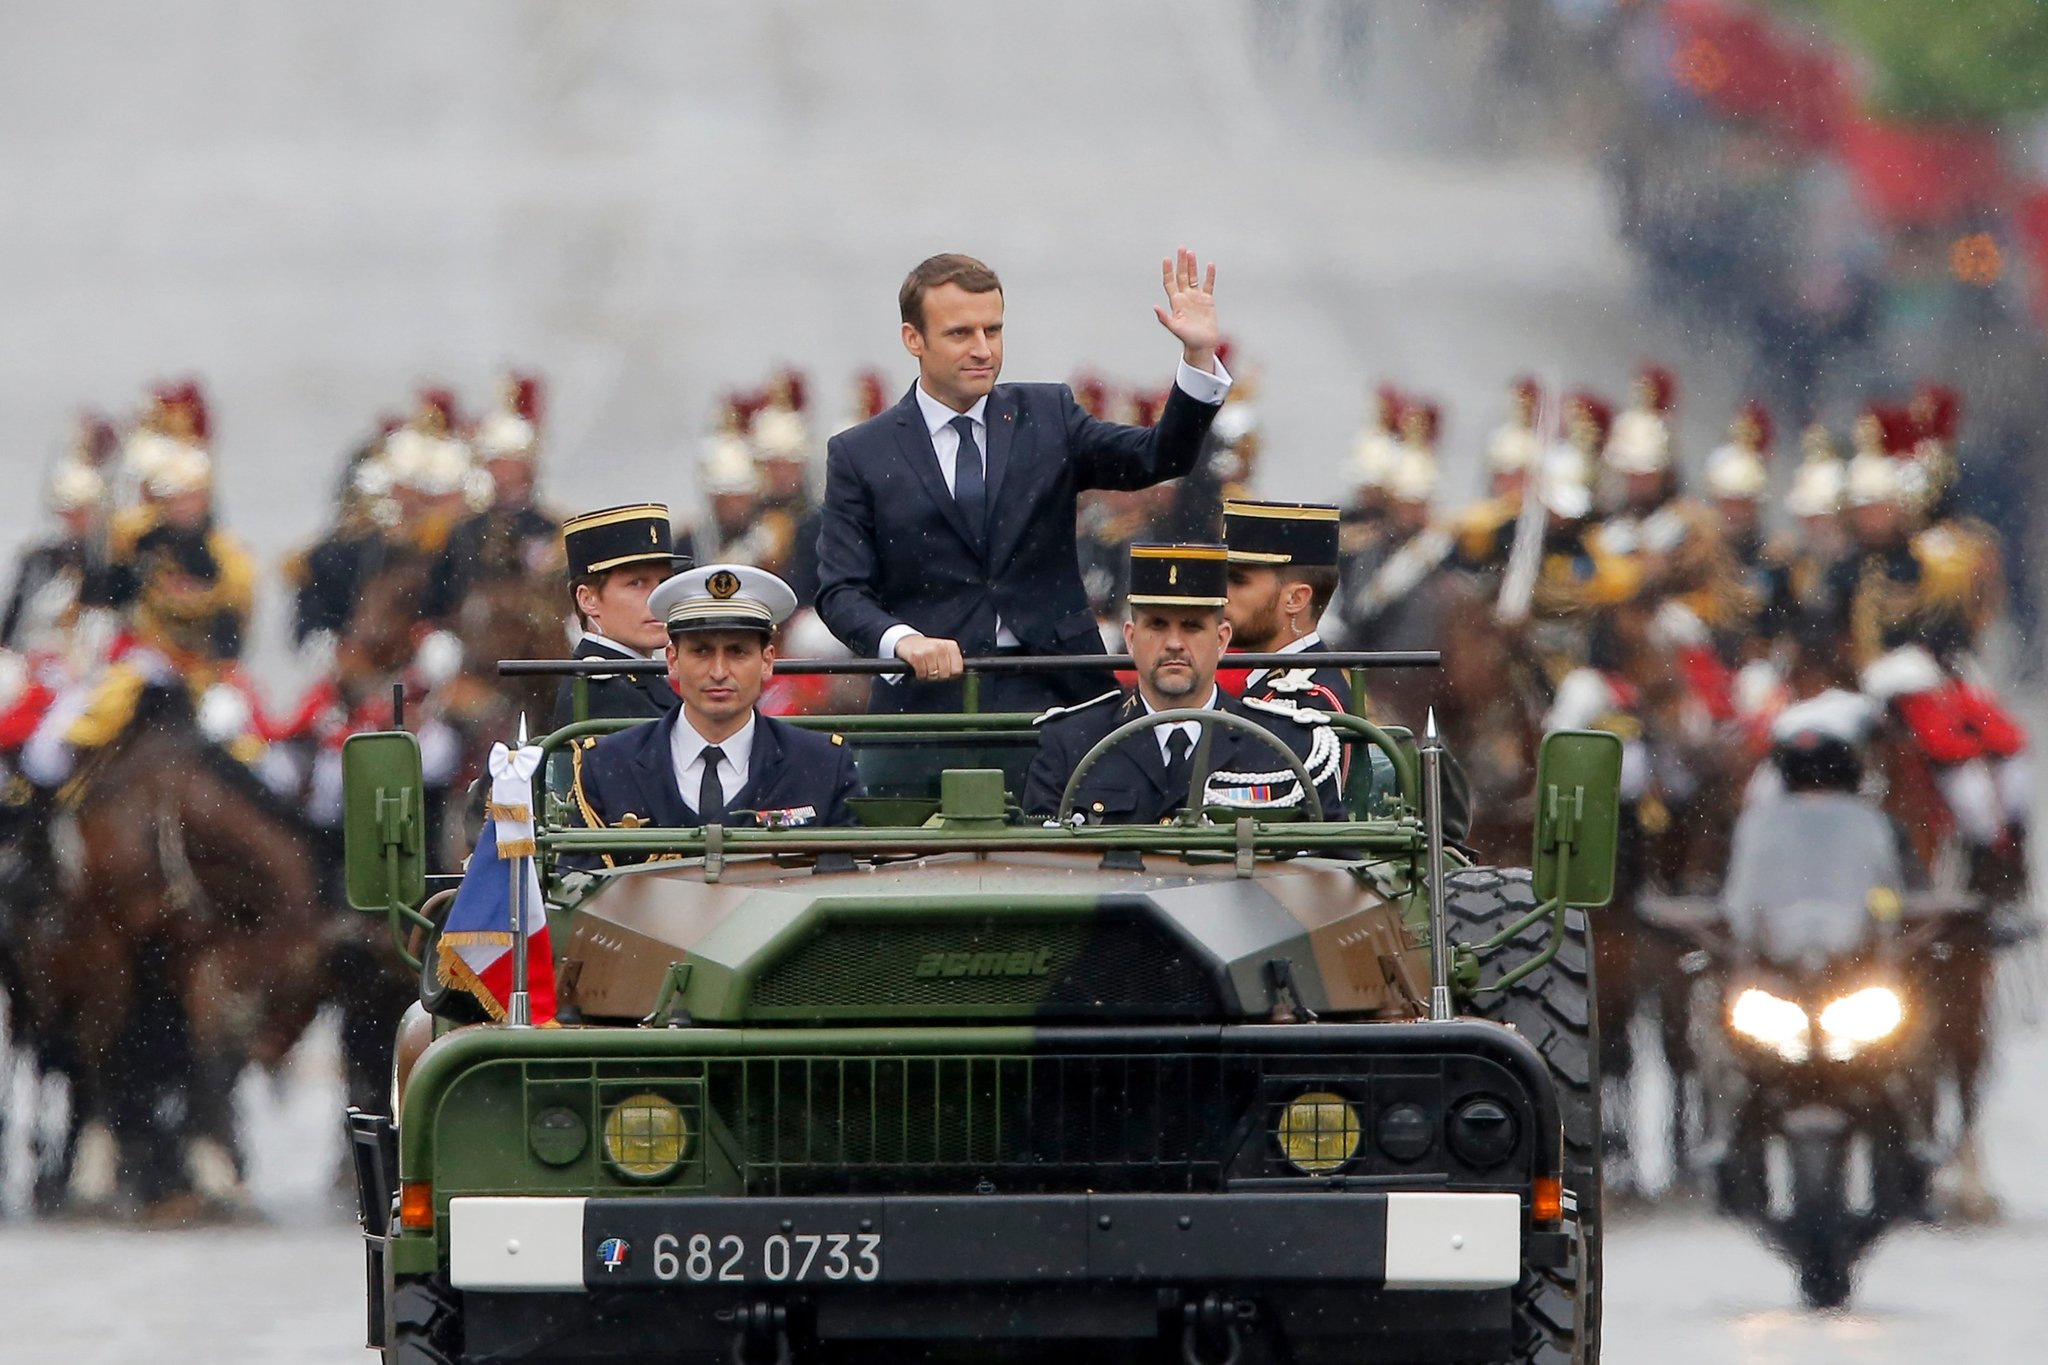 Show of military might as Emmanuel Macron is inaugurated French ...